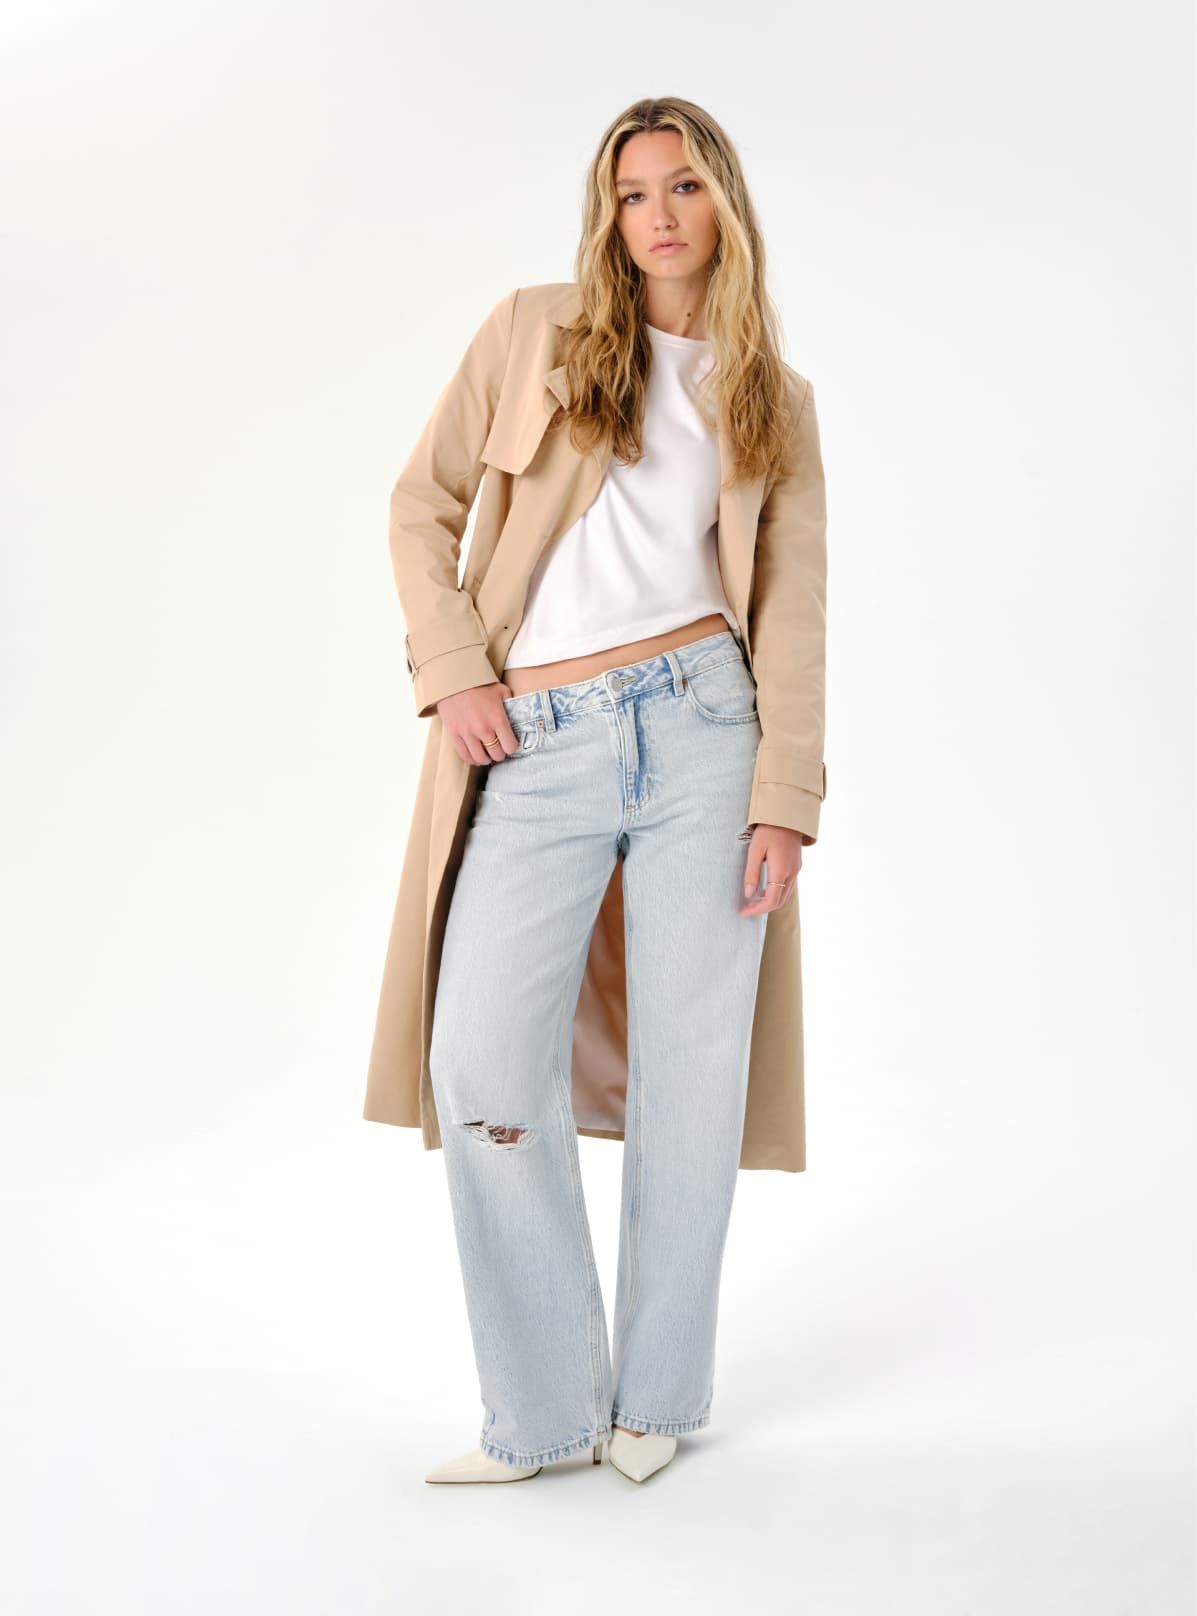 A model wears light blue distressed relaxed jeans with a white shirt and beige trench coat.